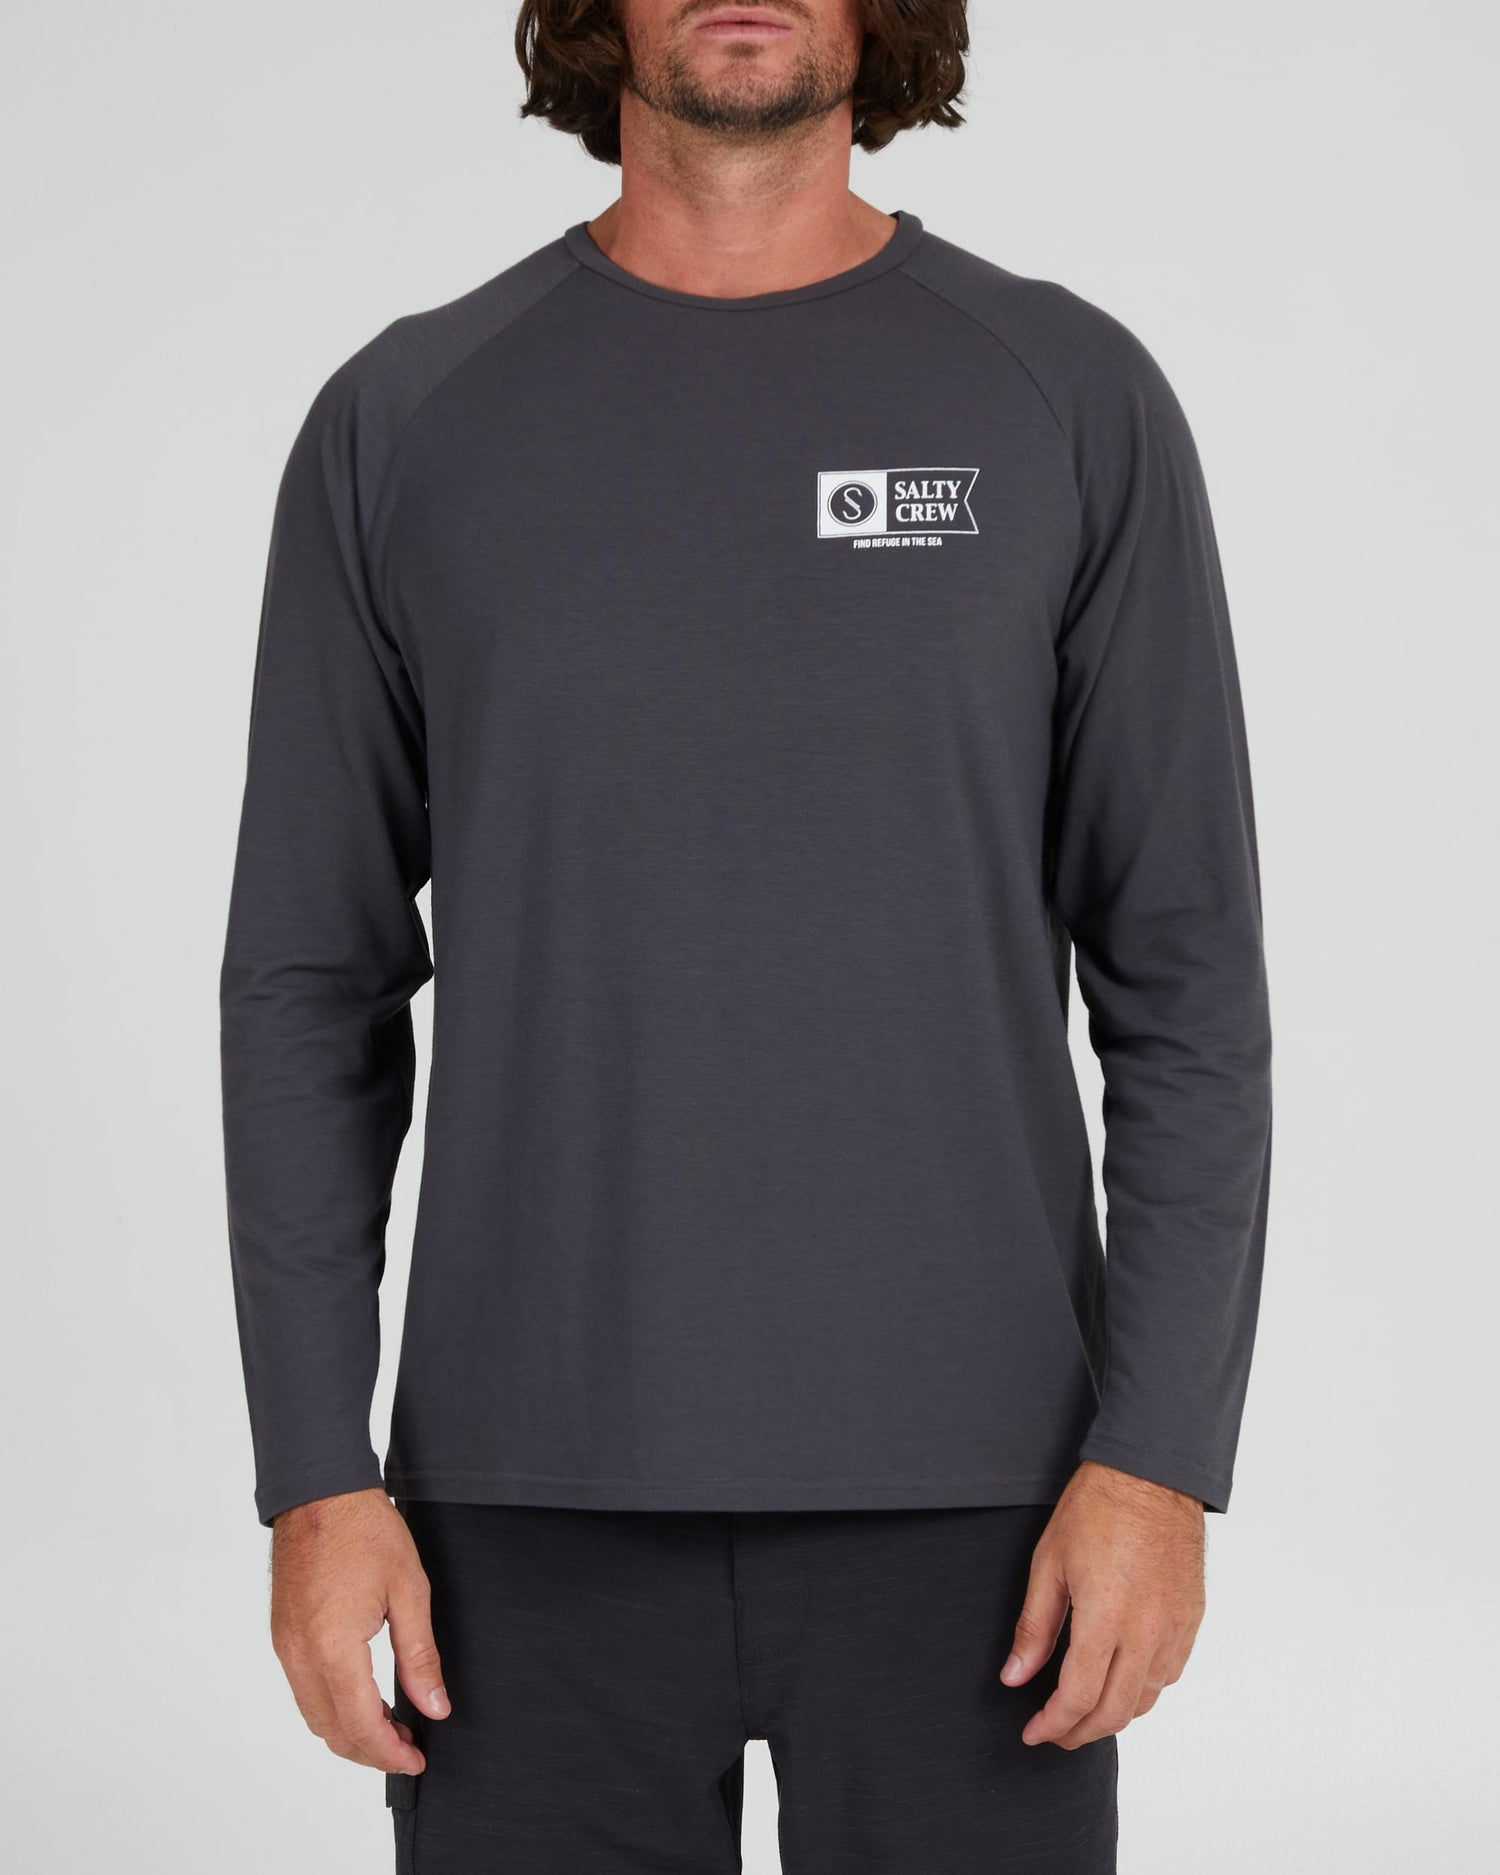 Salty crew SUN PROTECTION MARINER UV L/S - Charcoal in Charcoal